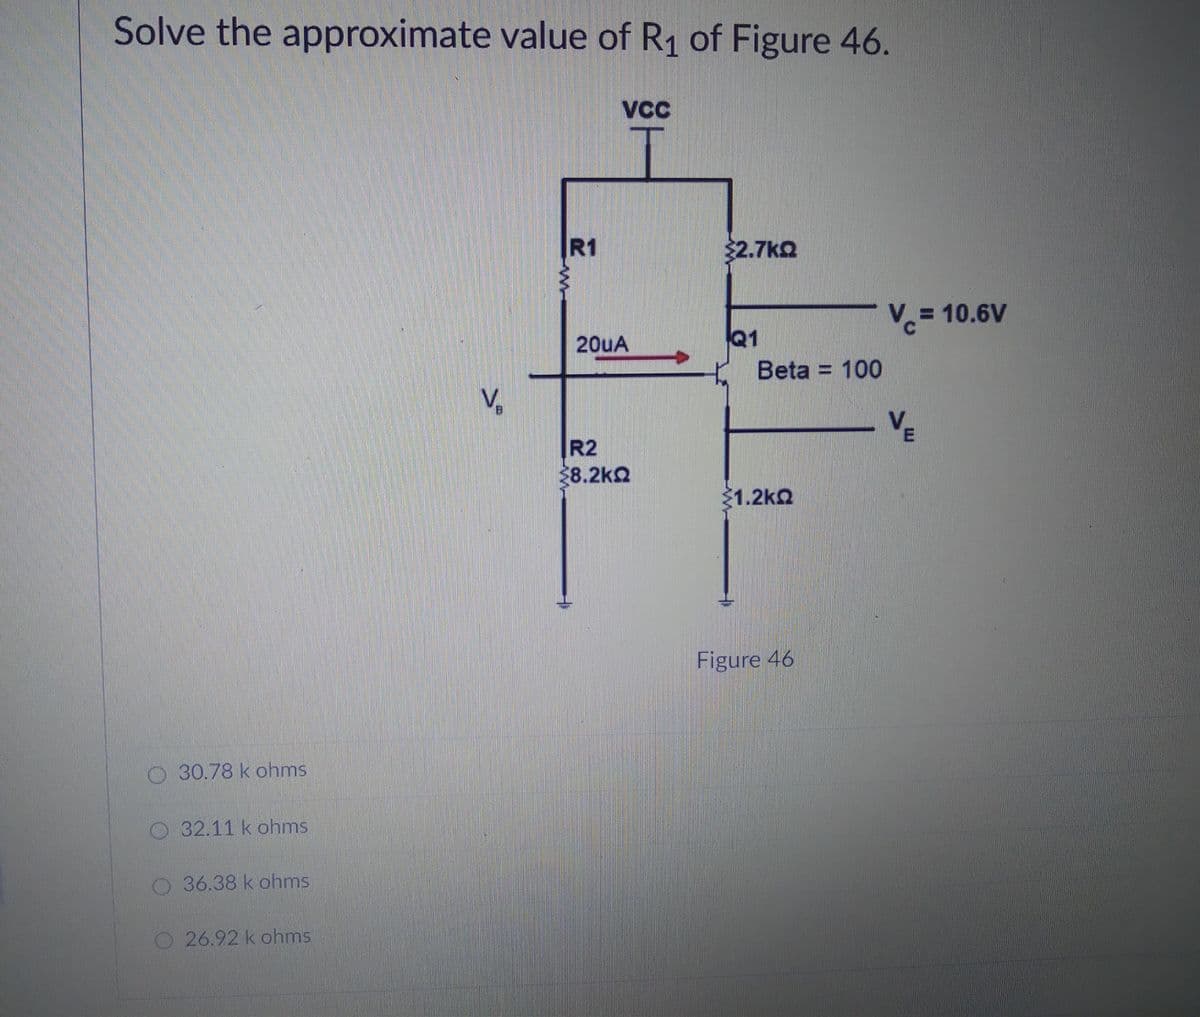 Solve the approximate value of R1 of Figure 46.
VC
R1
$2.7kQ
3D10.6V
Q1
Beta = 100
20uA
V,
R2
28.2k2
21.2kQ
Figure 46
O 30.78 k ohms
O32.11 k ohms
O36.38 k ohms
O26.92 k ohms
